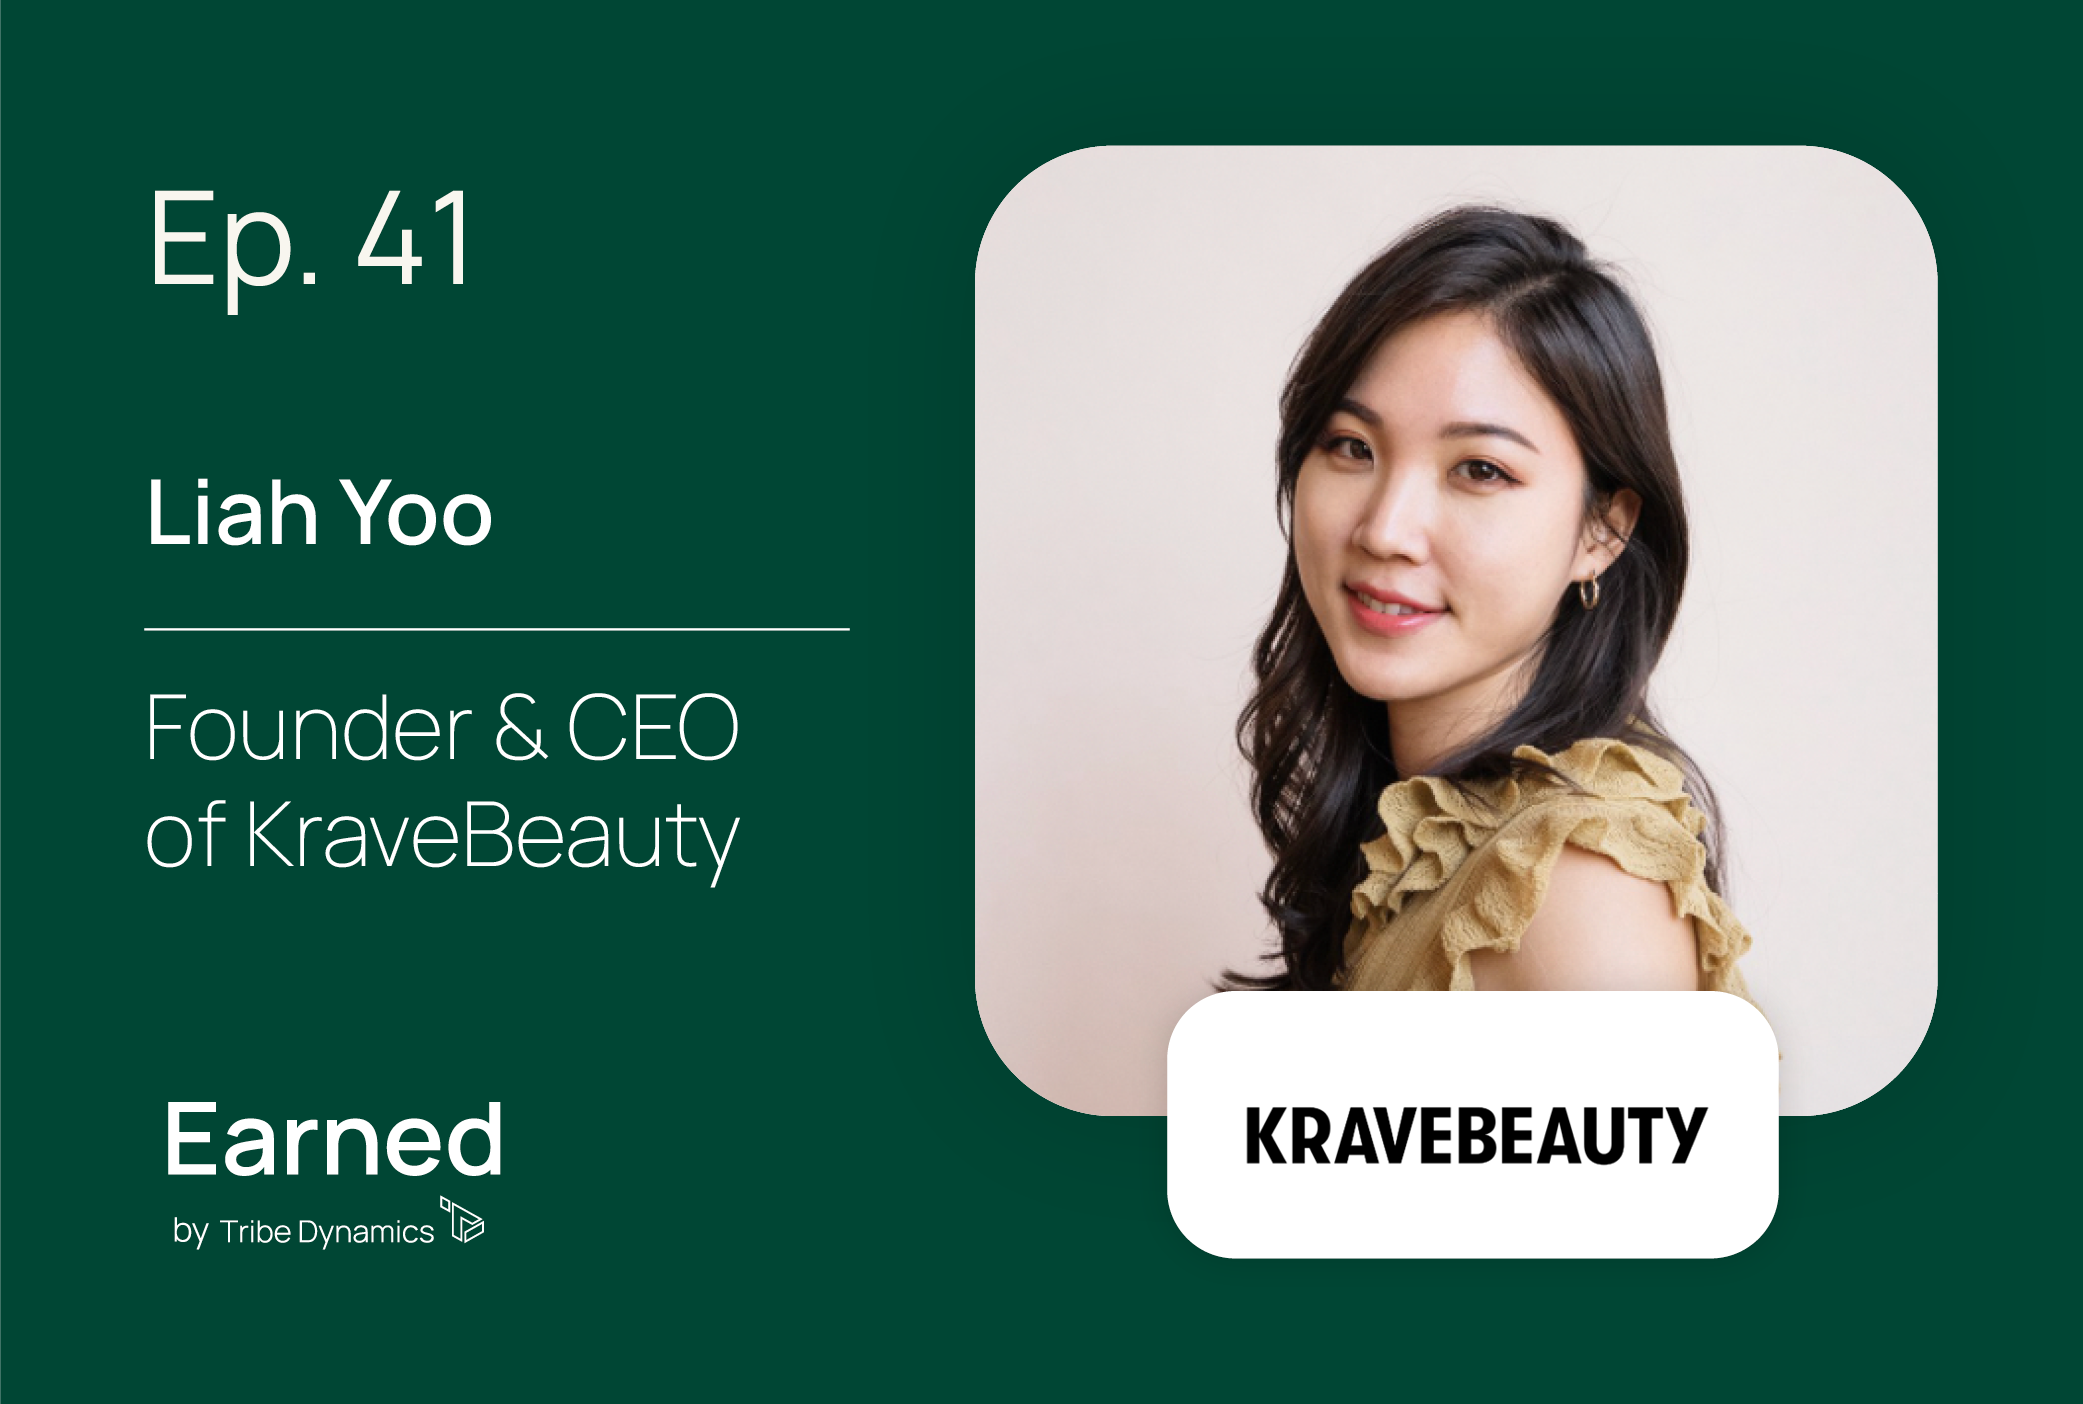 Earned Ep. 41: YouTuber and KraveBeauty Founder Liah Yoo on Creating Community and Demystifying Skincare